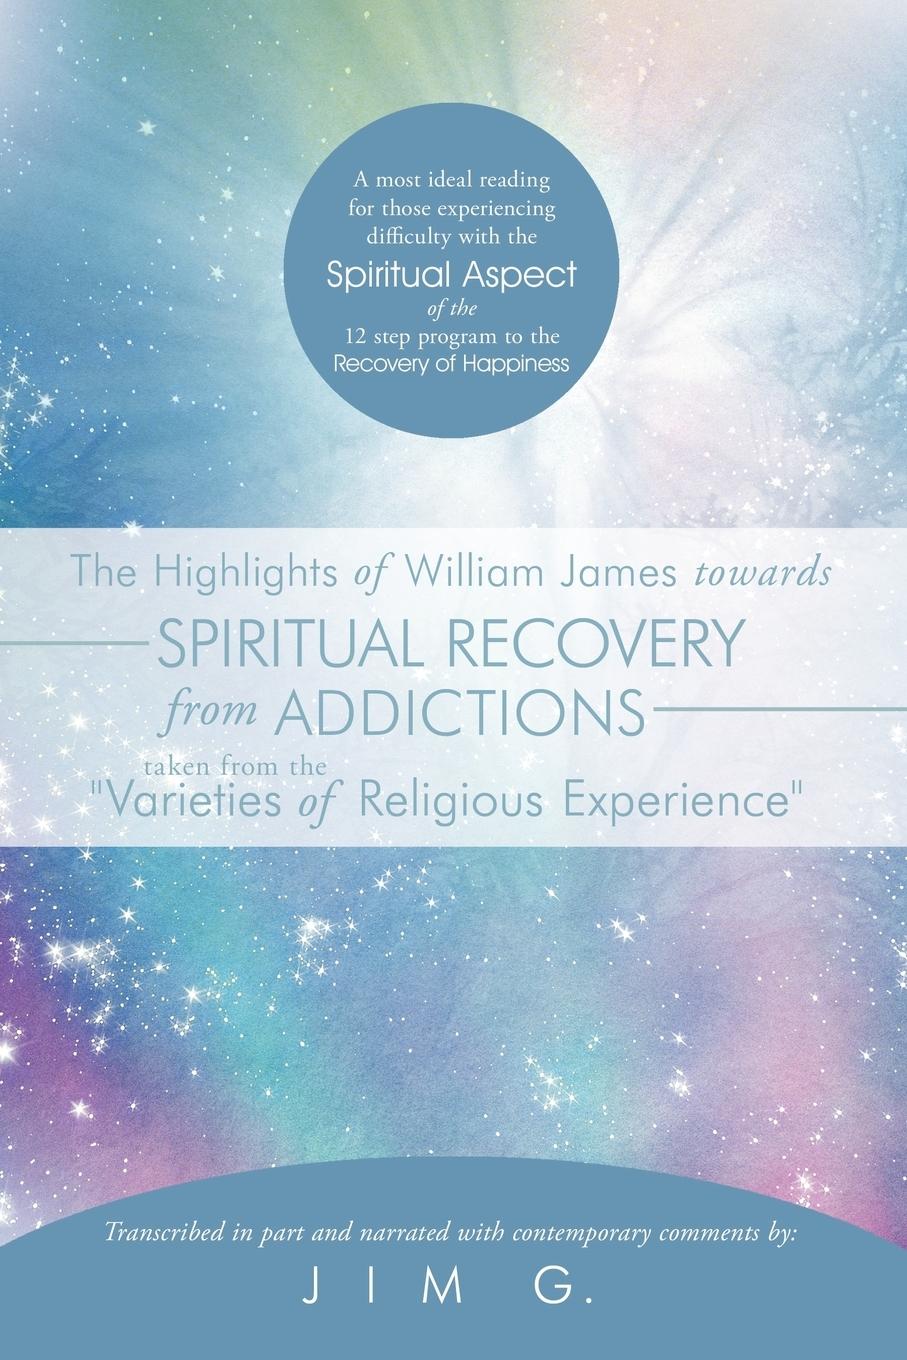 The Highlights of William James Towards Spiritual Recovery from Addictions Taken from the Varieties of Religious Experience - Jim G.